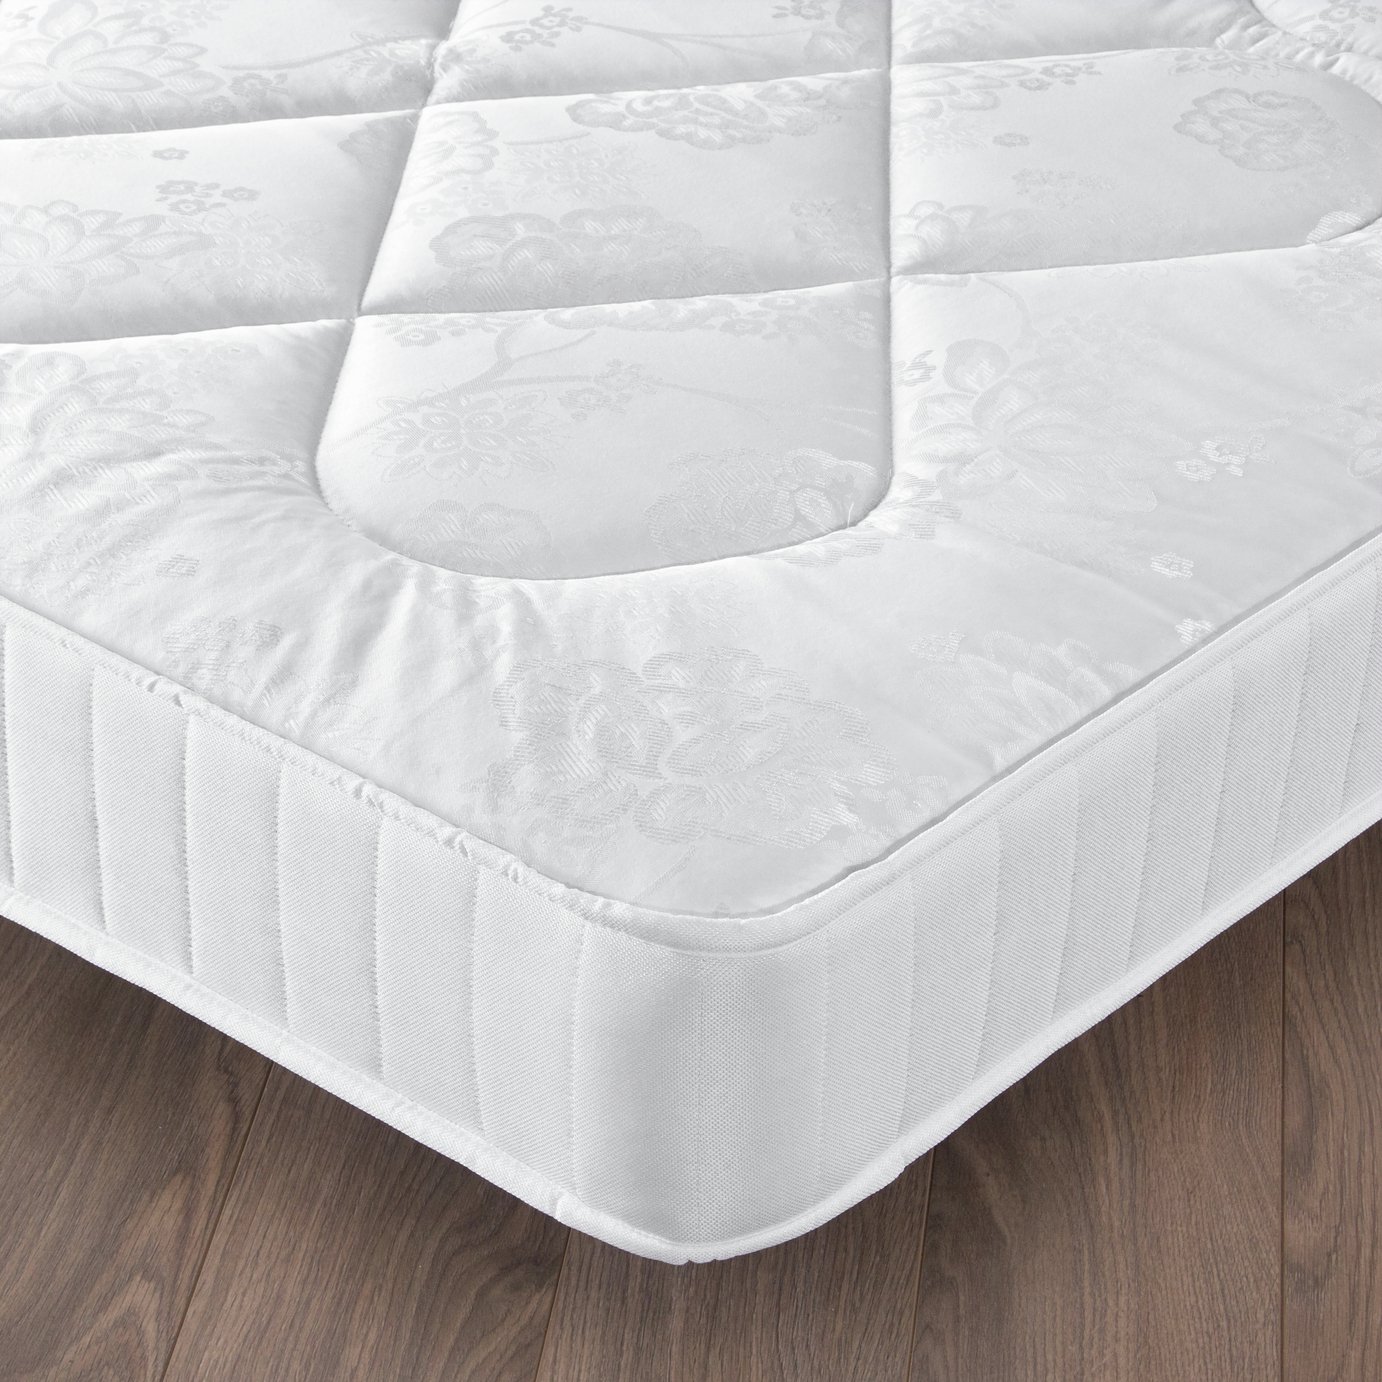 airsprung atherton ortho comfort double mattress review